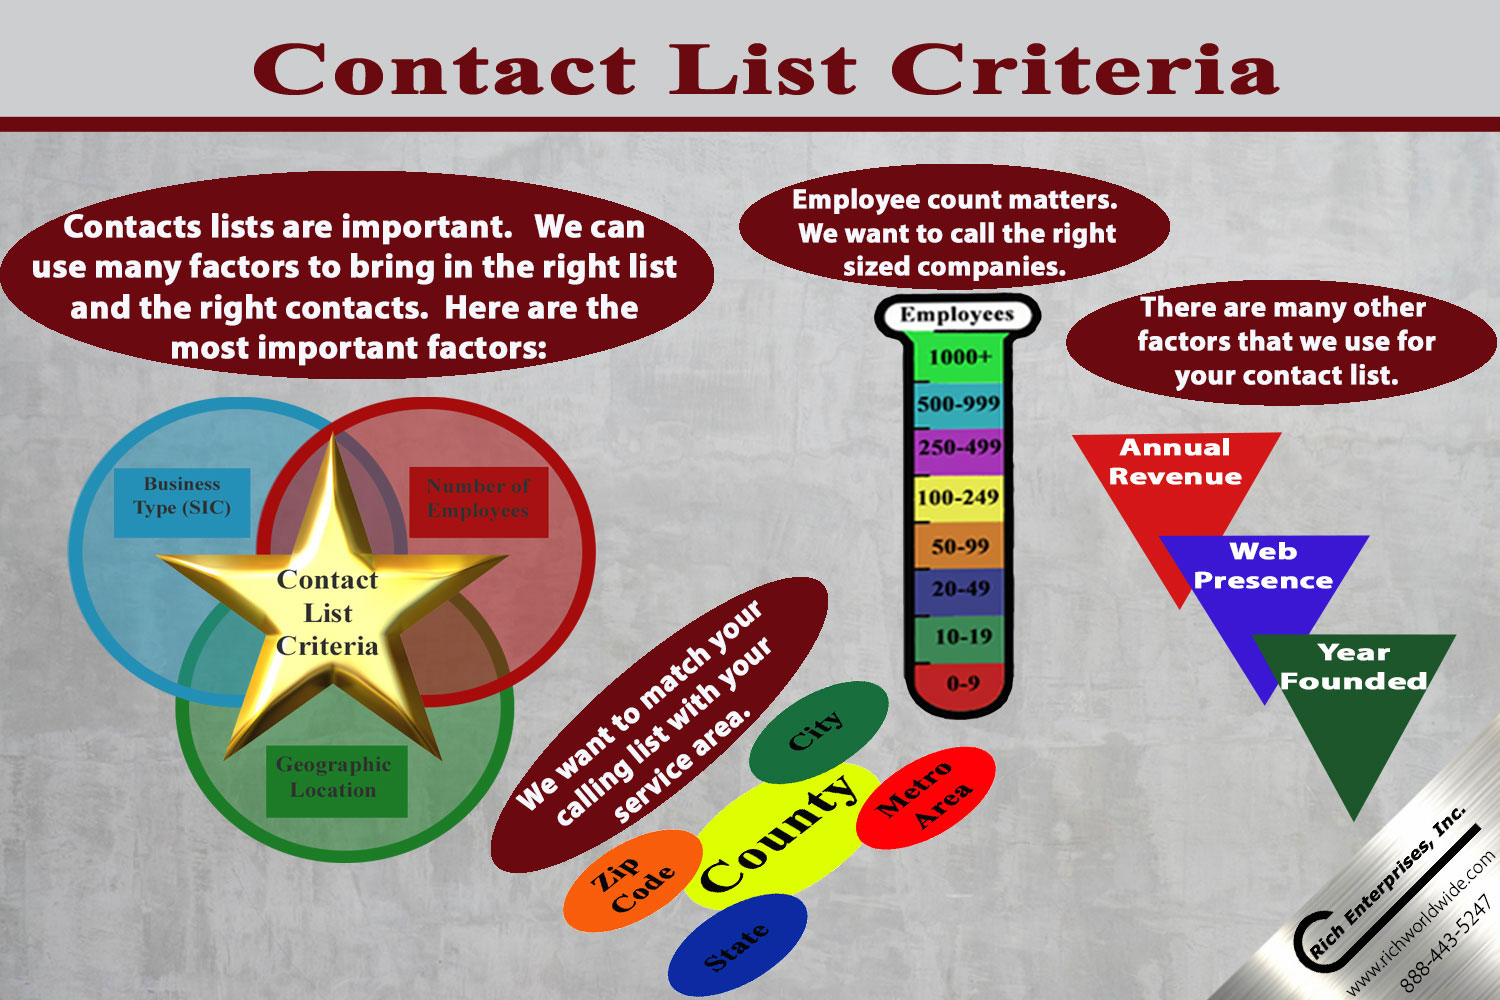 FAQ for a Contact List Criteria for Industrial Inside Sales